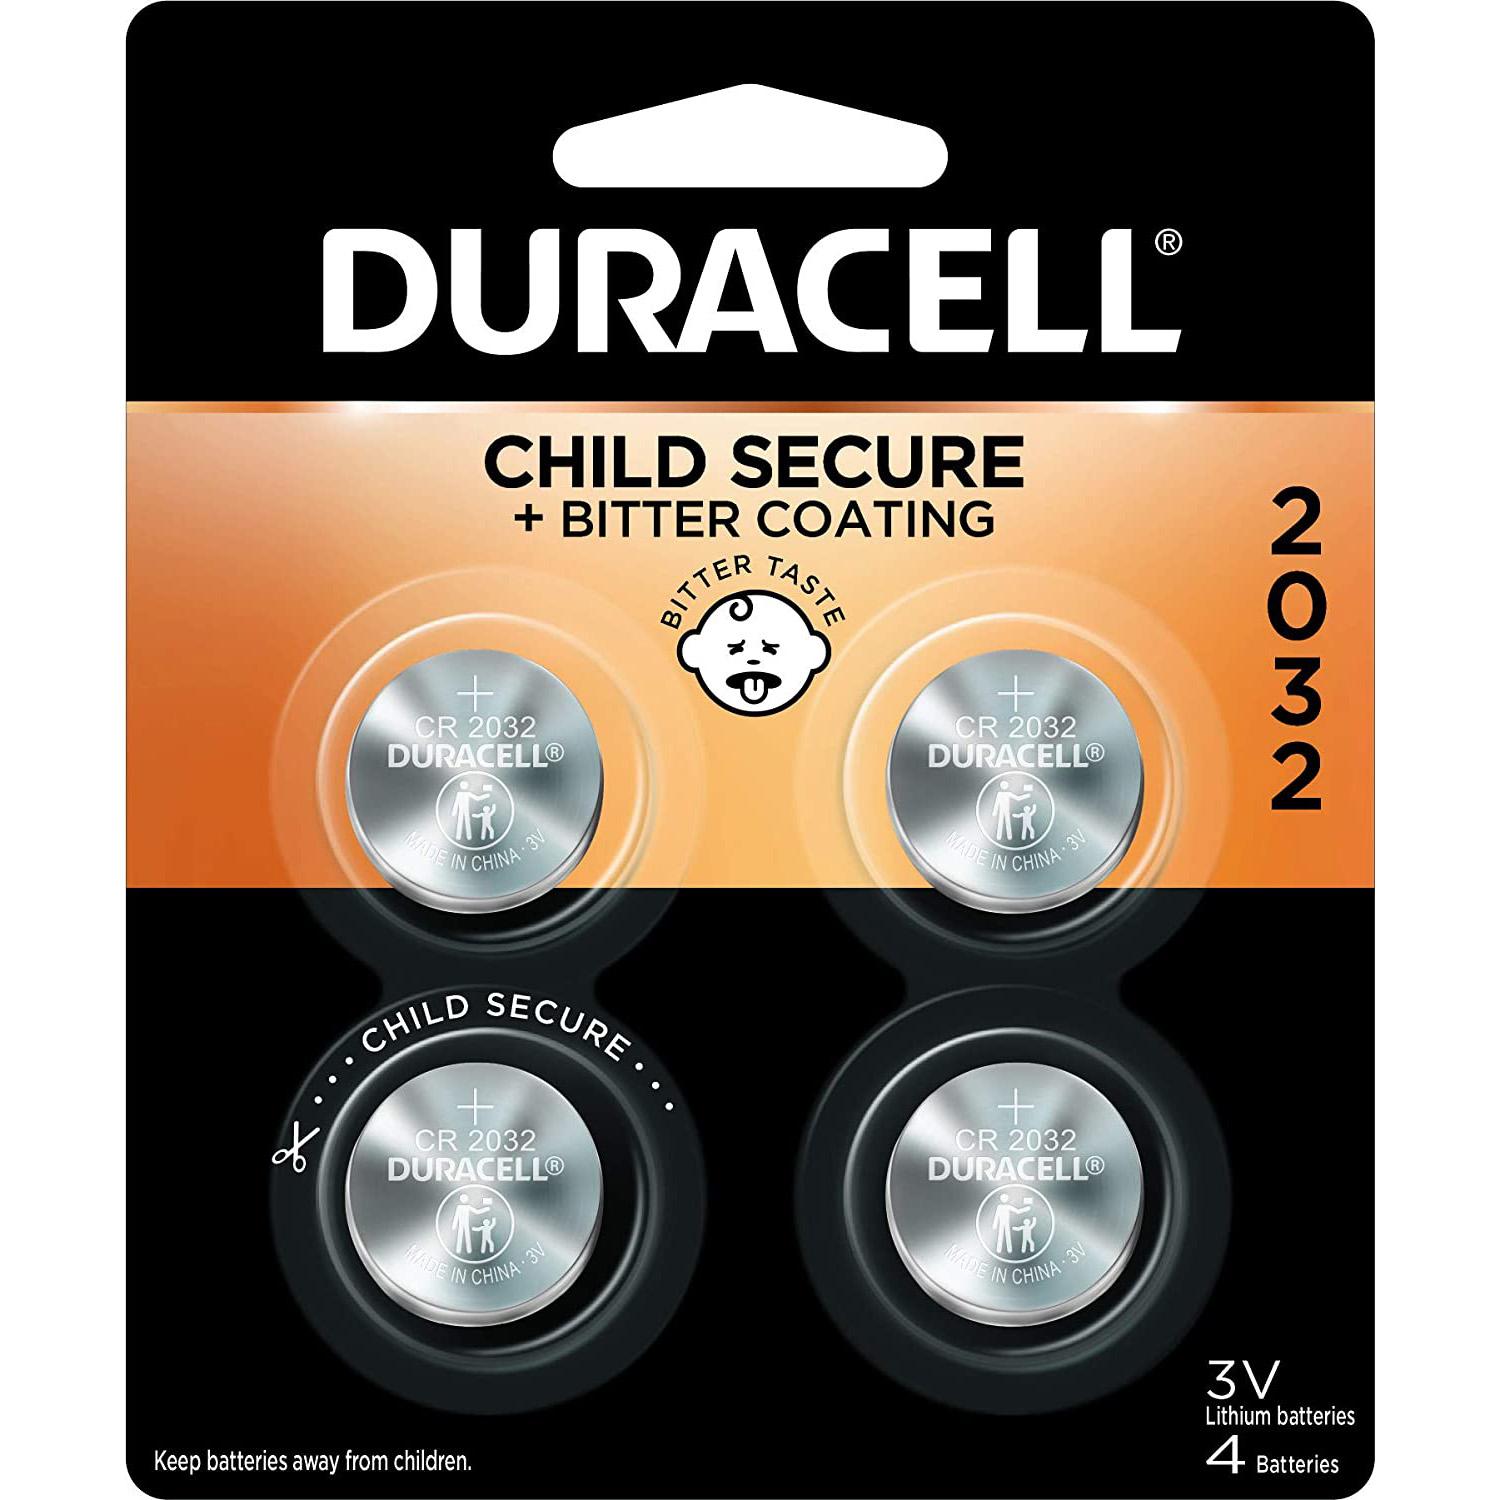 4 Duracell 2032 Lithium 3V Coin Batteries for $2.03 Shipped